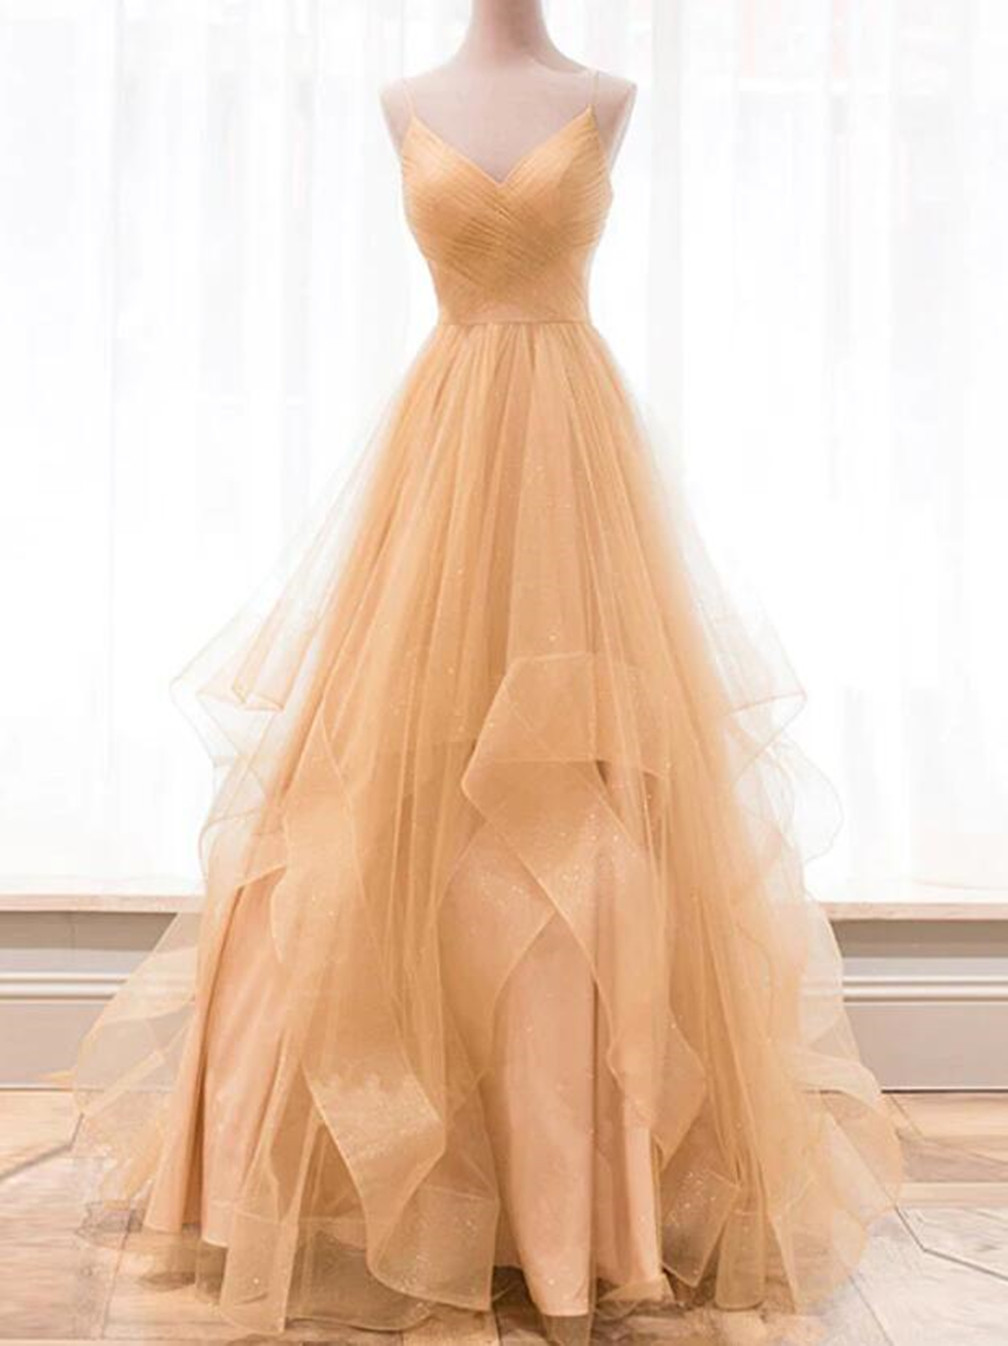 Women V-neck Tulle Prom Dresses Long A-line Evening Party Gowns Sleeveless Formal Dress Yp039